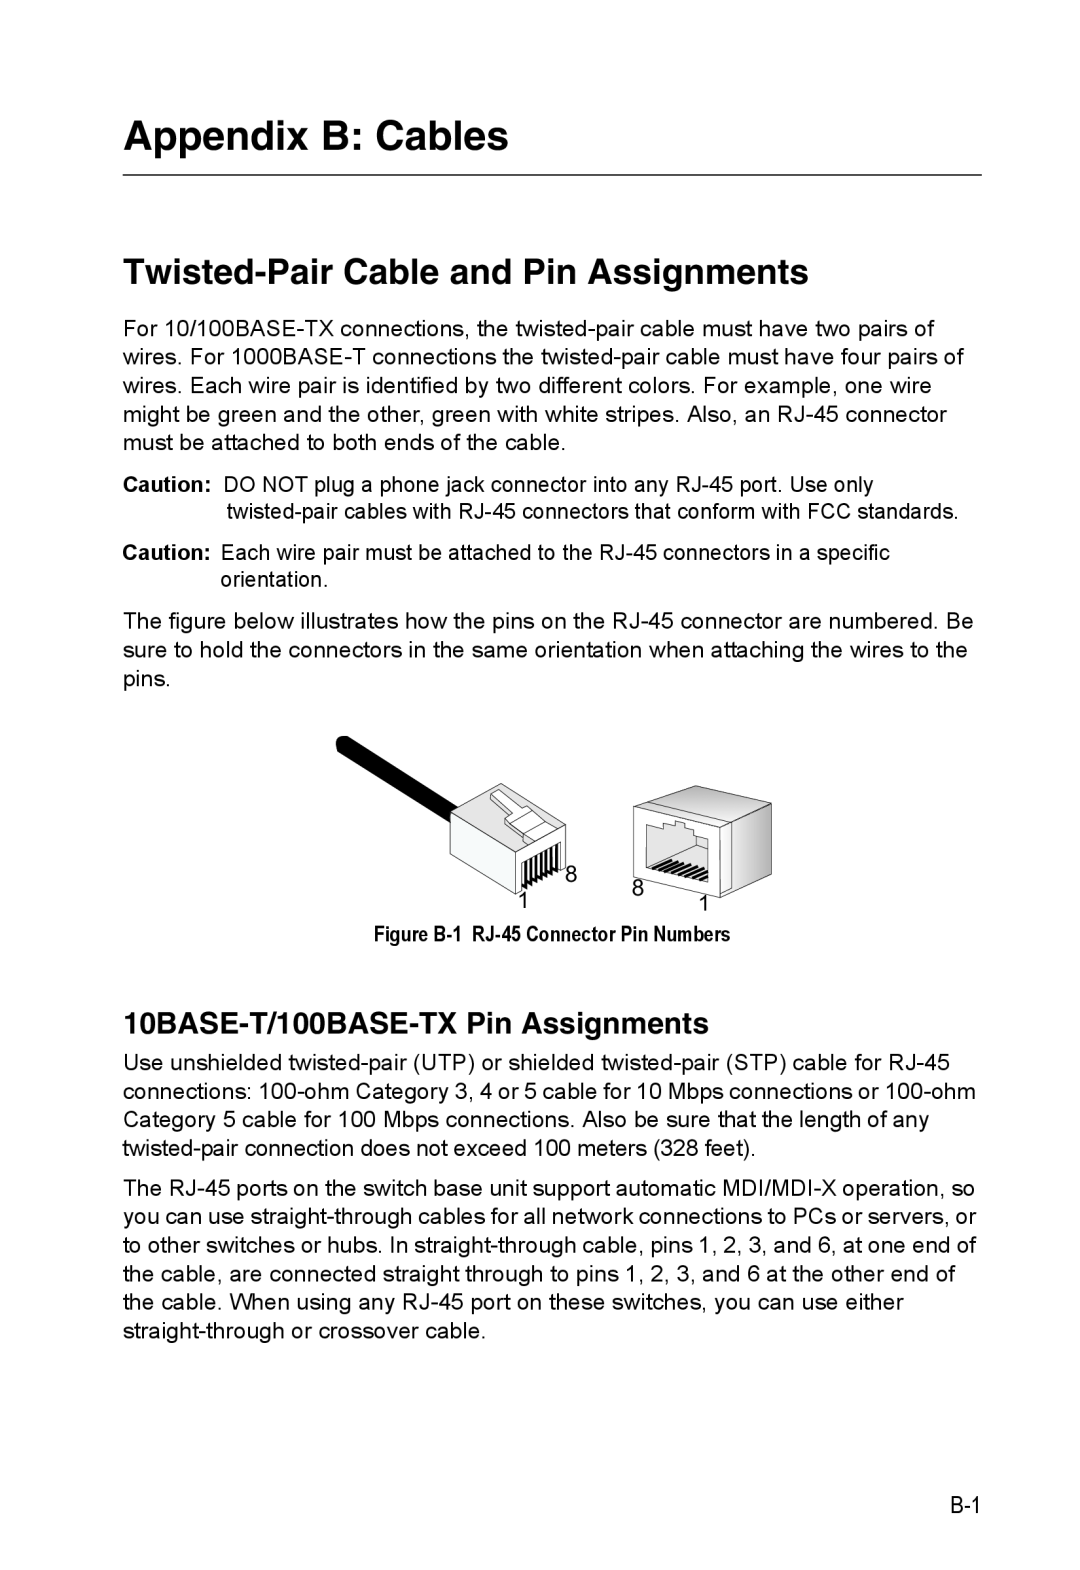 SMC Networks SMC8126PL2-F Appendix B Cables, Twisted-PairCable and Pin Assignments, 10BASE-T/100BASE-TXPin Assignments 